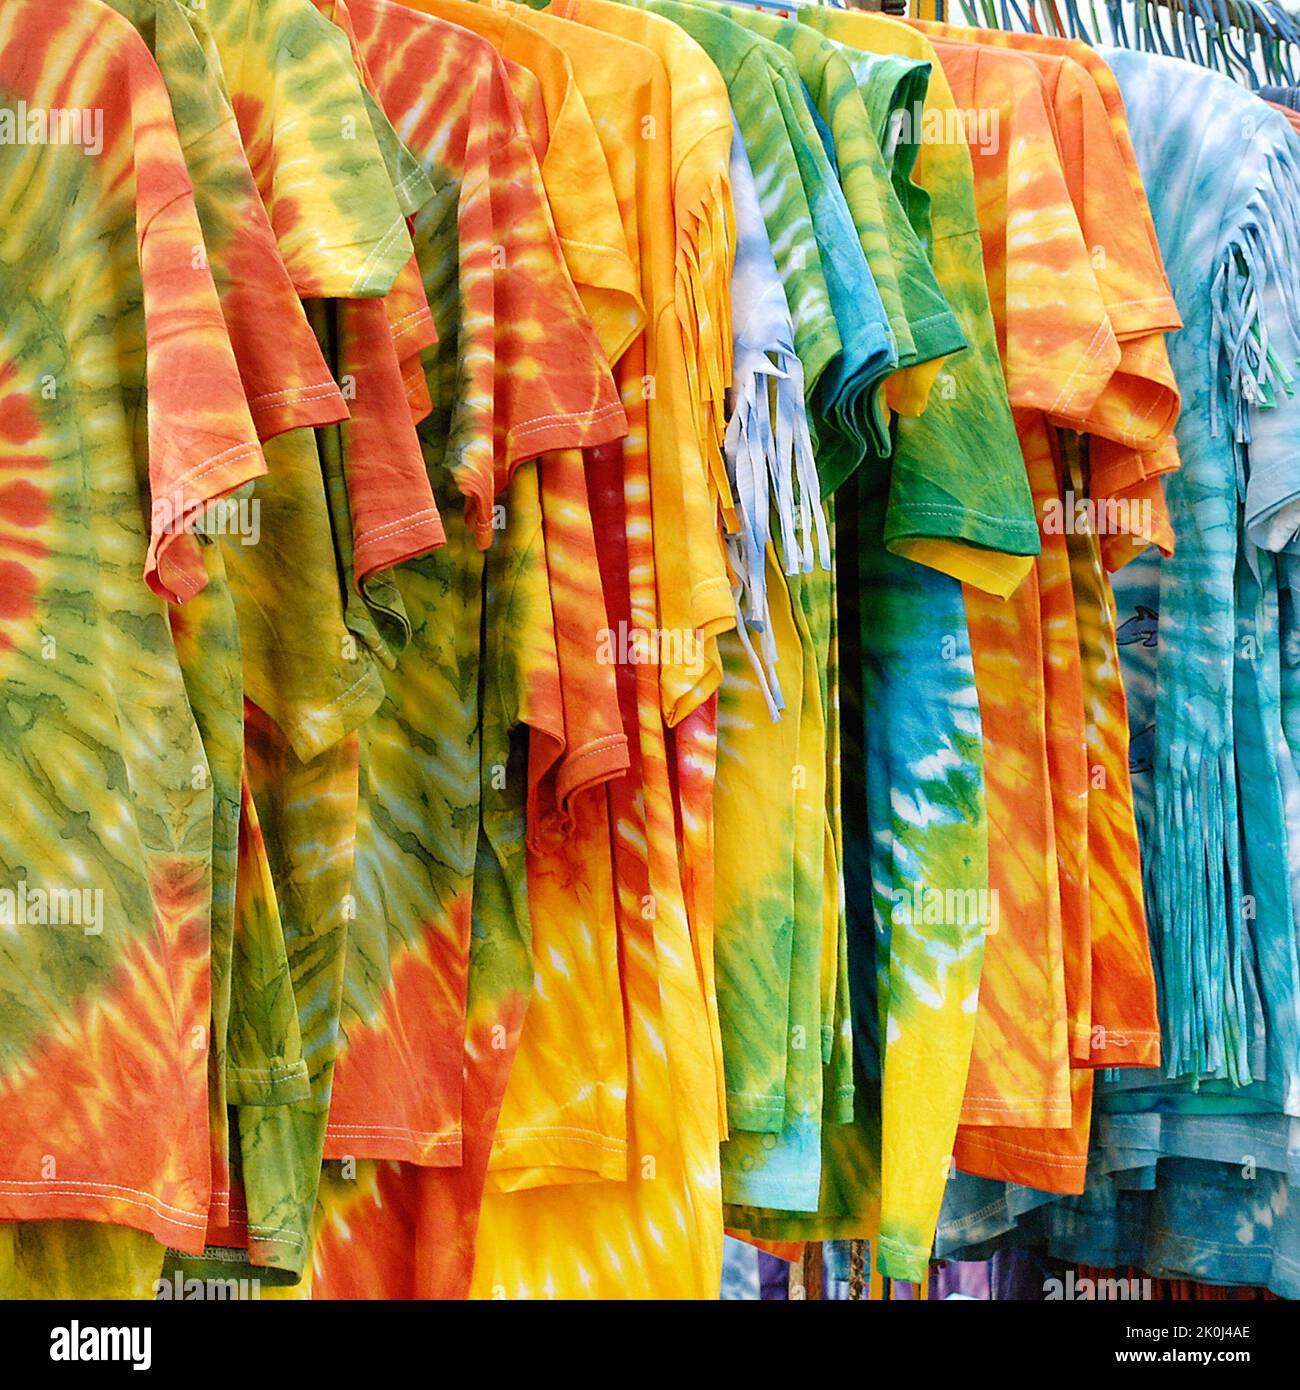 Close up of tie dye t-shirts for sale on a market stall Es Cana Ibiza Spain Stock Photo